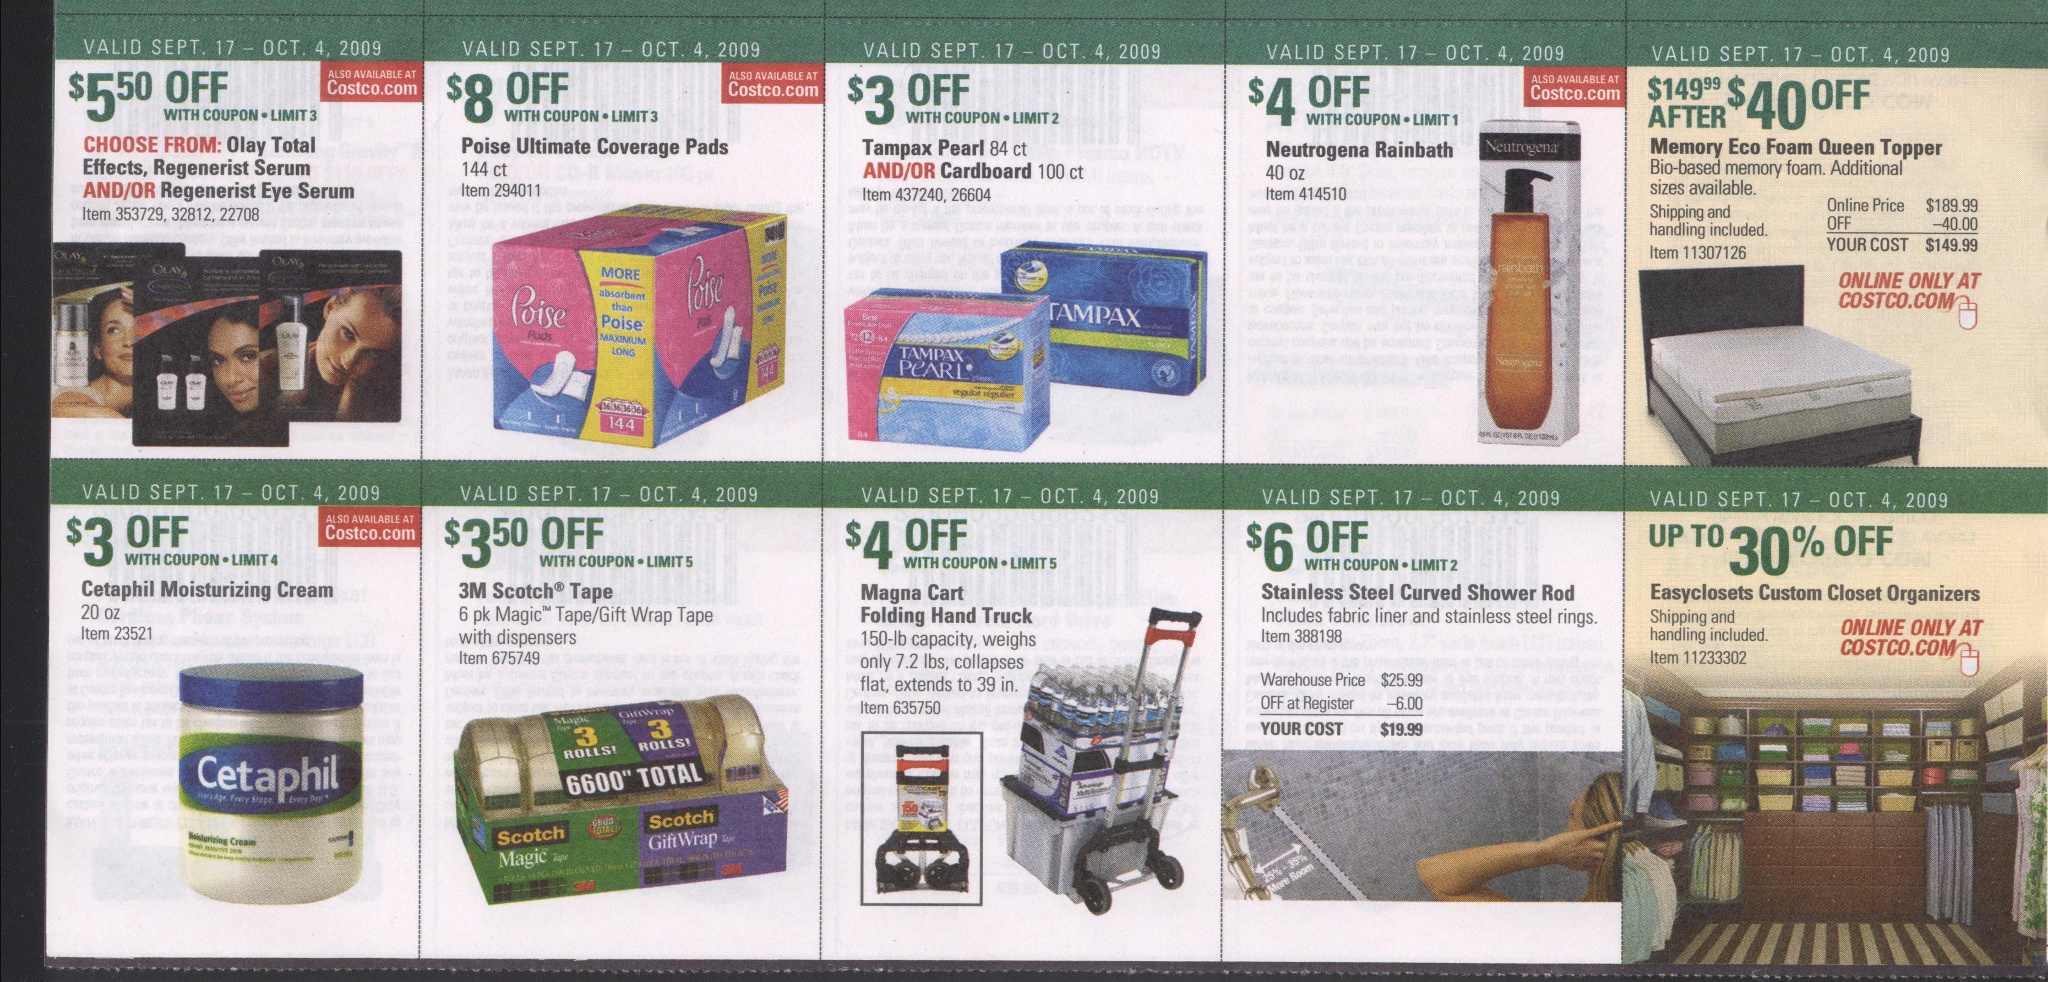 Full image coupon book page ->7<-